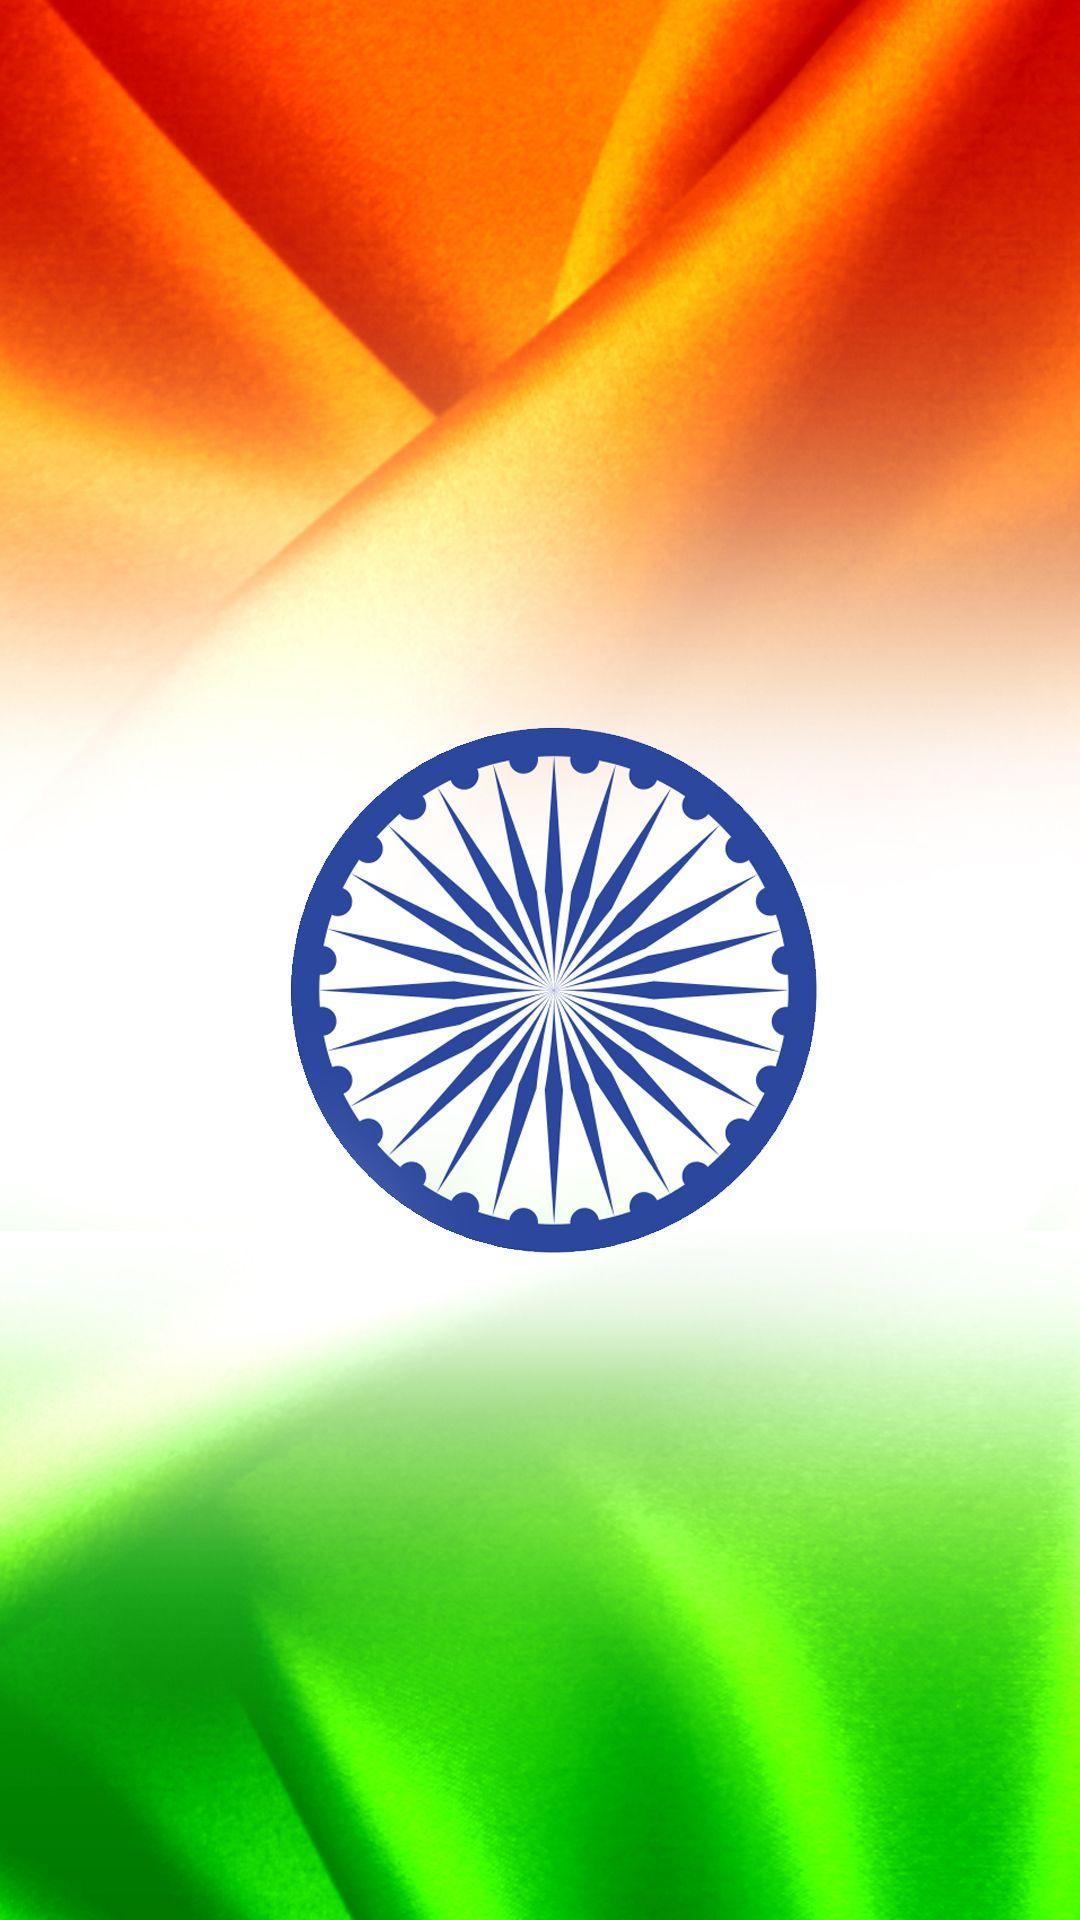 India Flag for Mobile Phone Wallpaper 11 of 17 India Flag Wallpaper. Wallpaper Download. High Resolution Wallpaper. Indian flag wallpaper, Indian flag, Indian flag photo